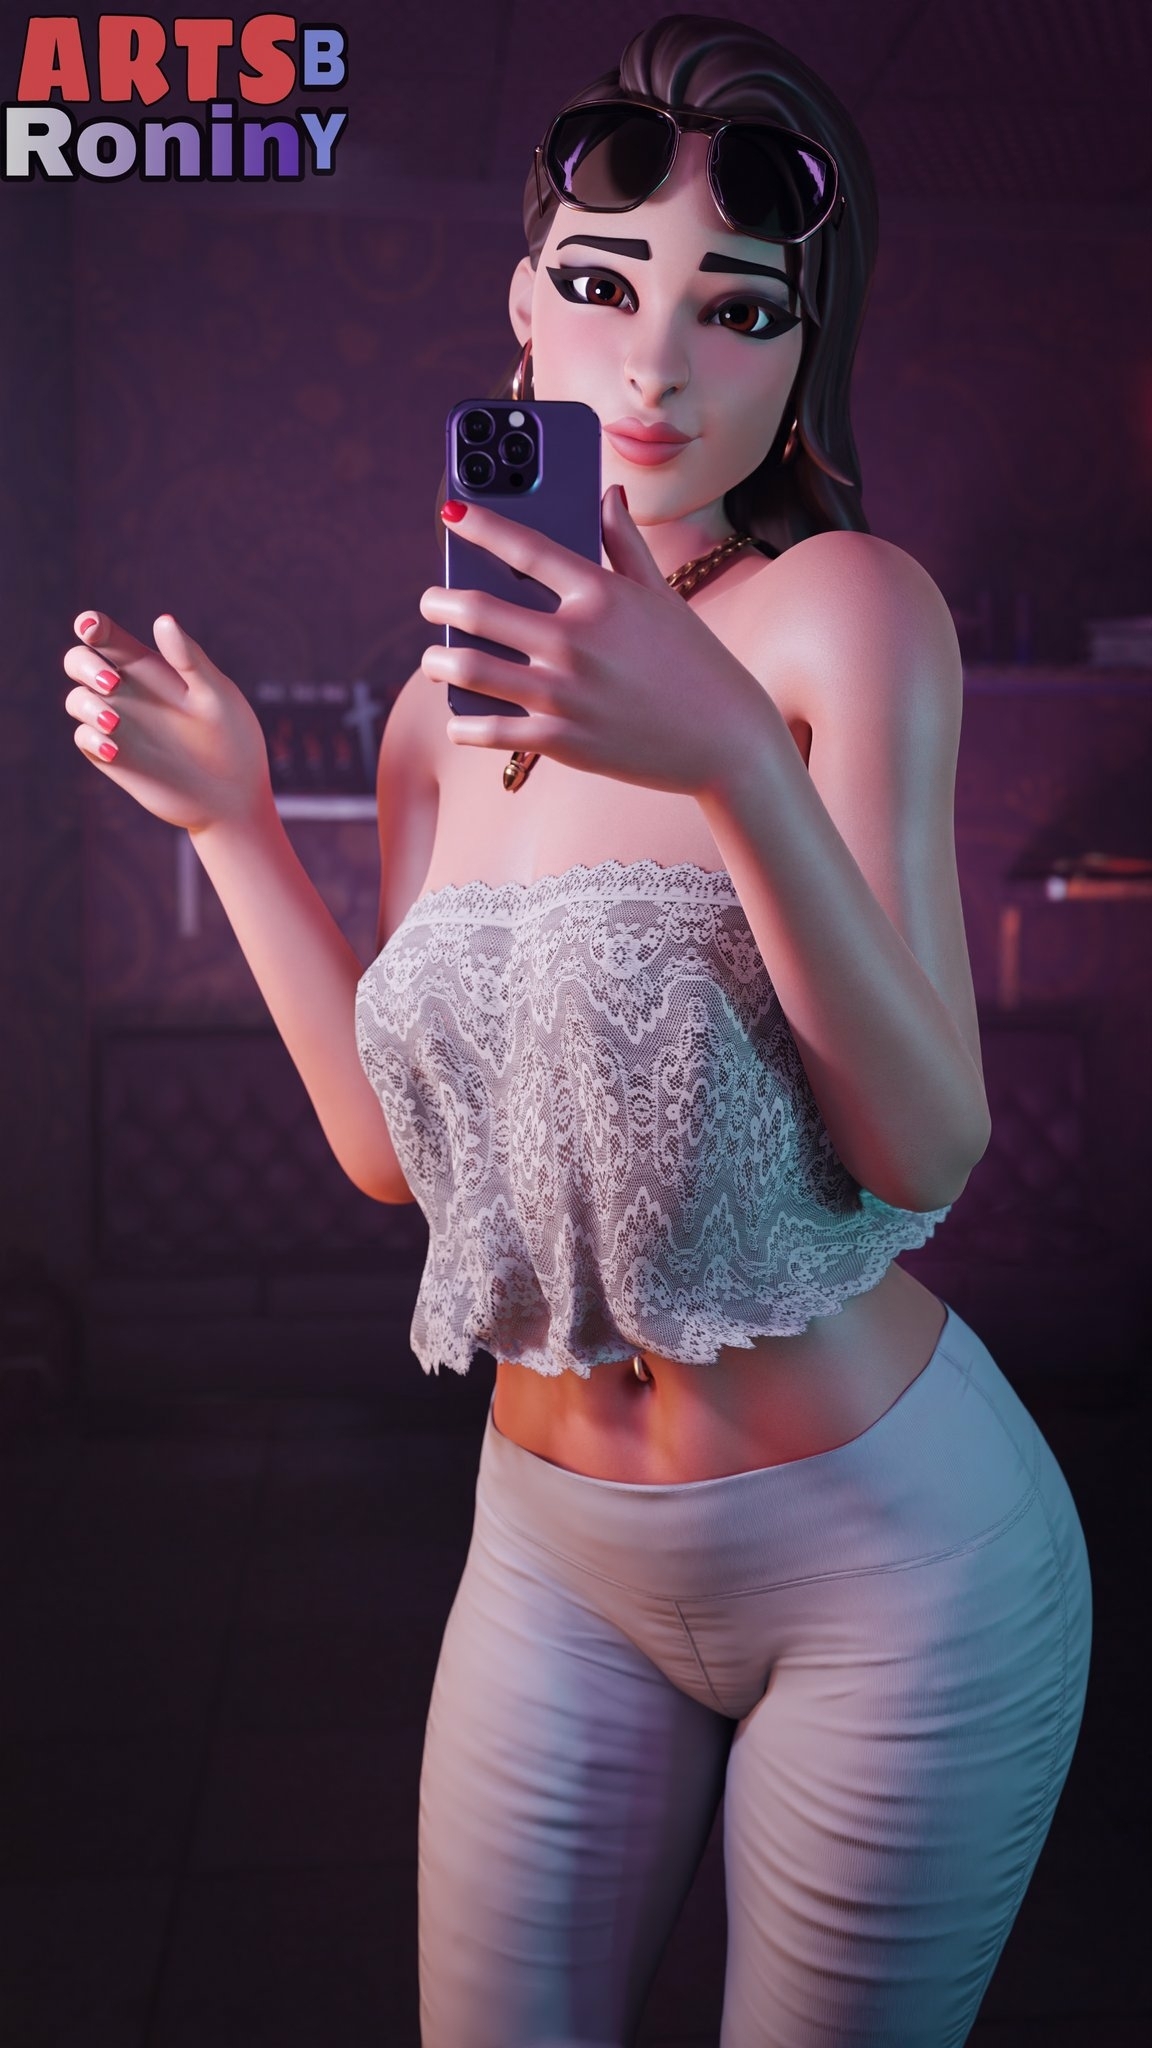 Wuby😋 mirror selfie🥰 Ruby (Fortnite) Fortnite Pussy Shaved Pussy Boobs Big boobs Tits Ass Sexy Horny Face Horny 3d Porn